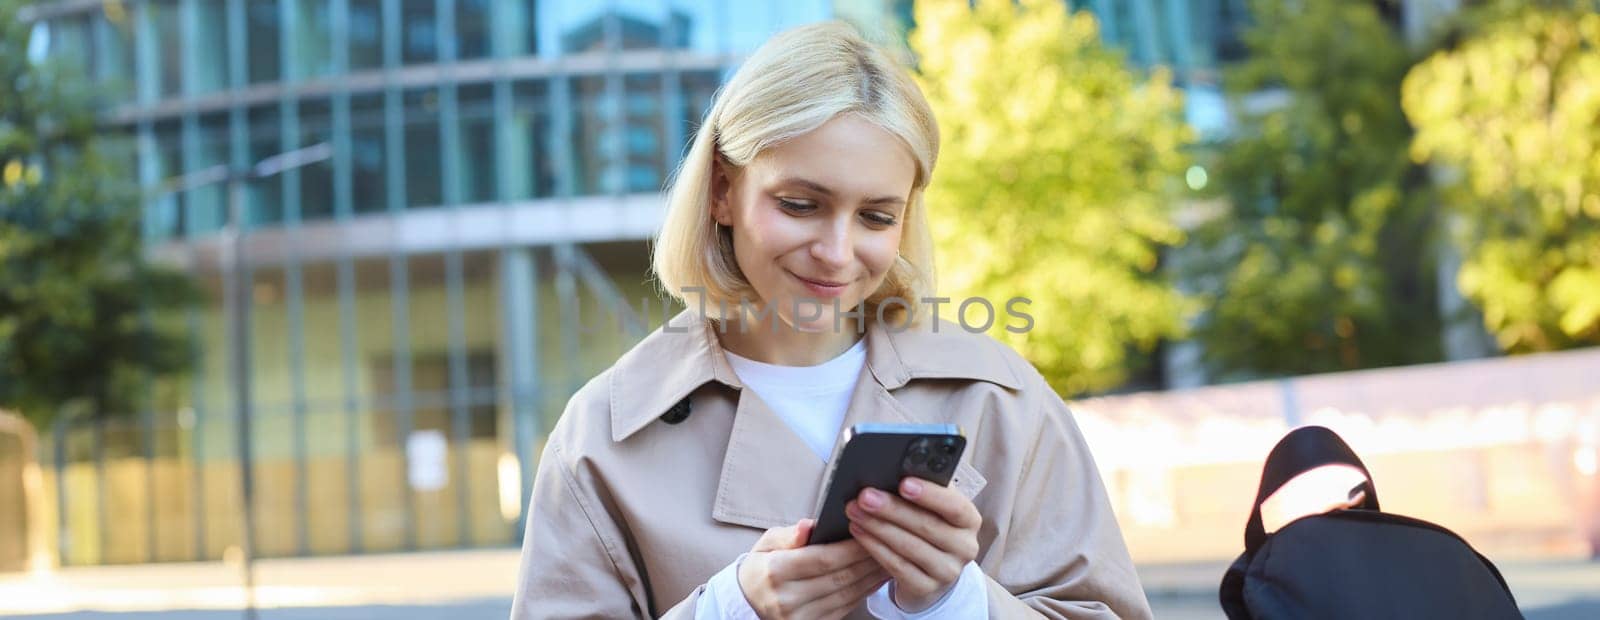 Close up portrait of smiling female model on street, sitting on bench with mobile phone, looking at smartphone screen, messaging with friend while waiting outside.